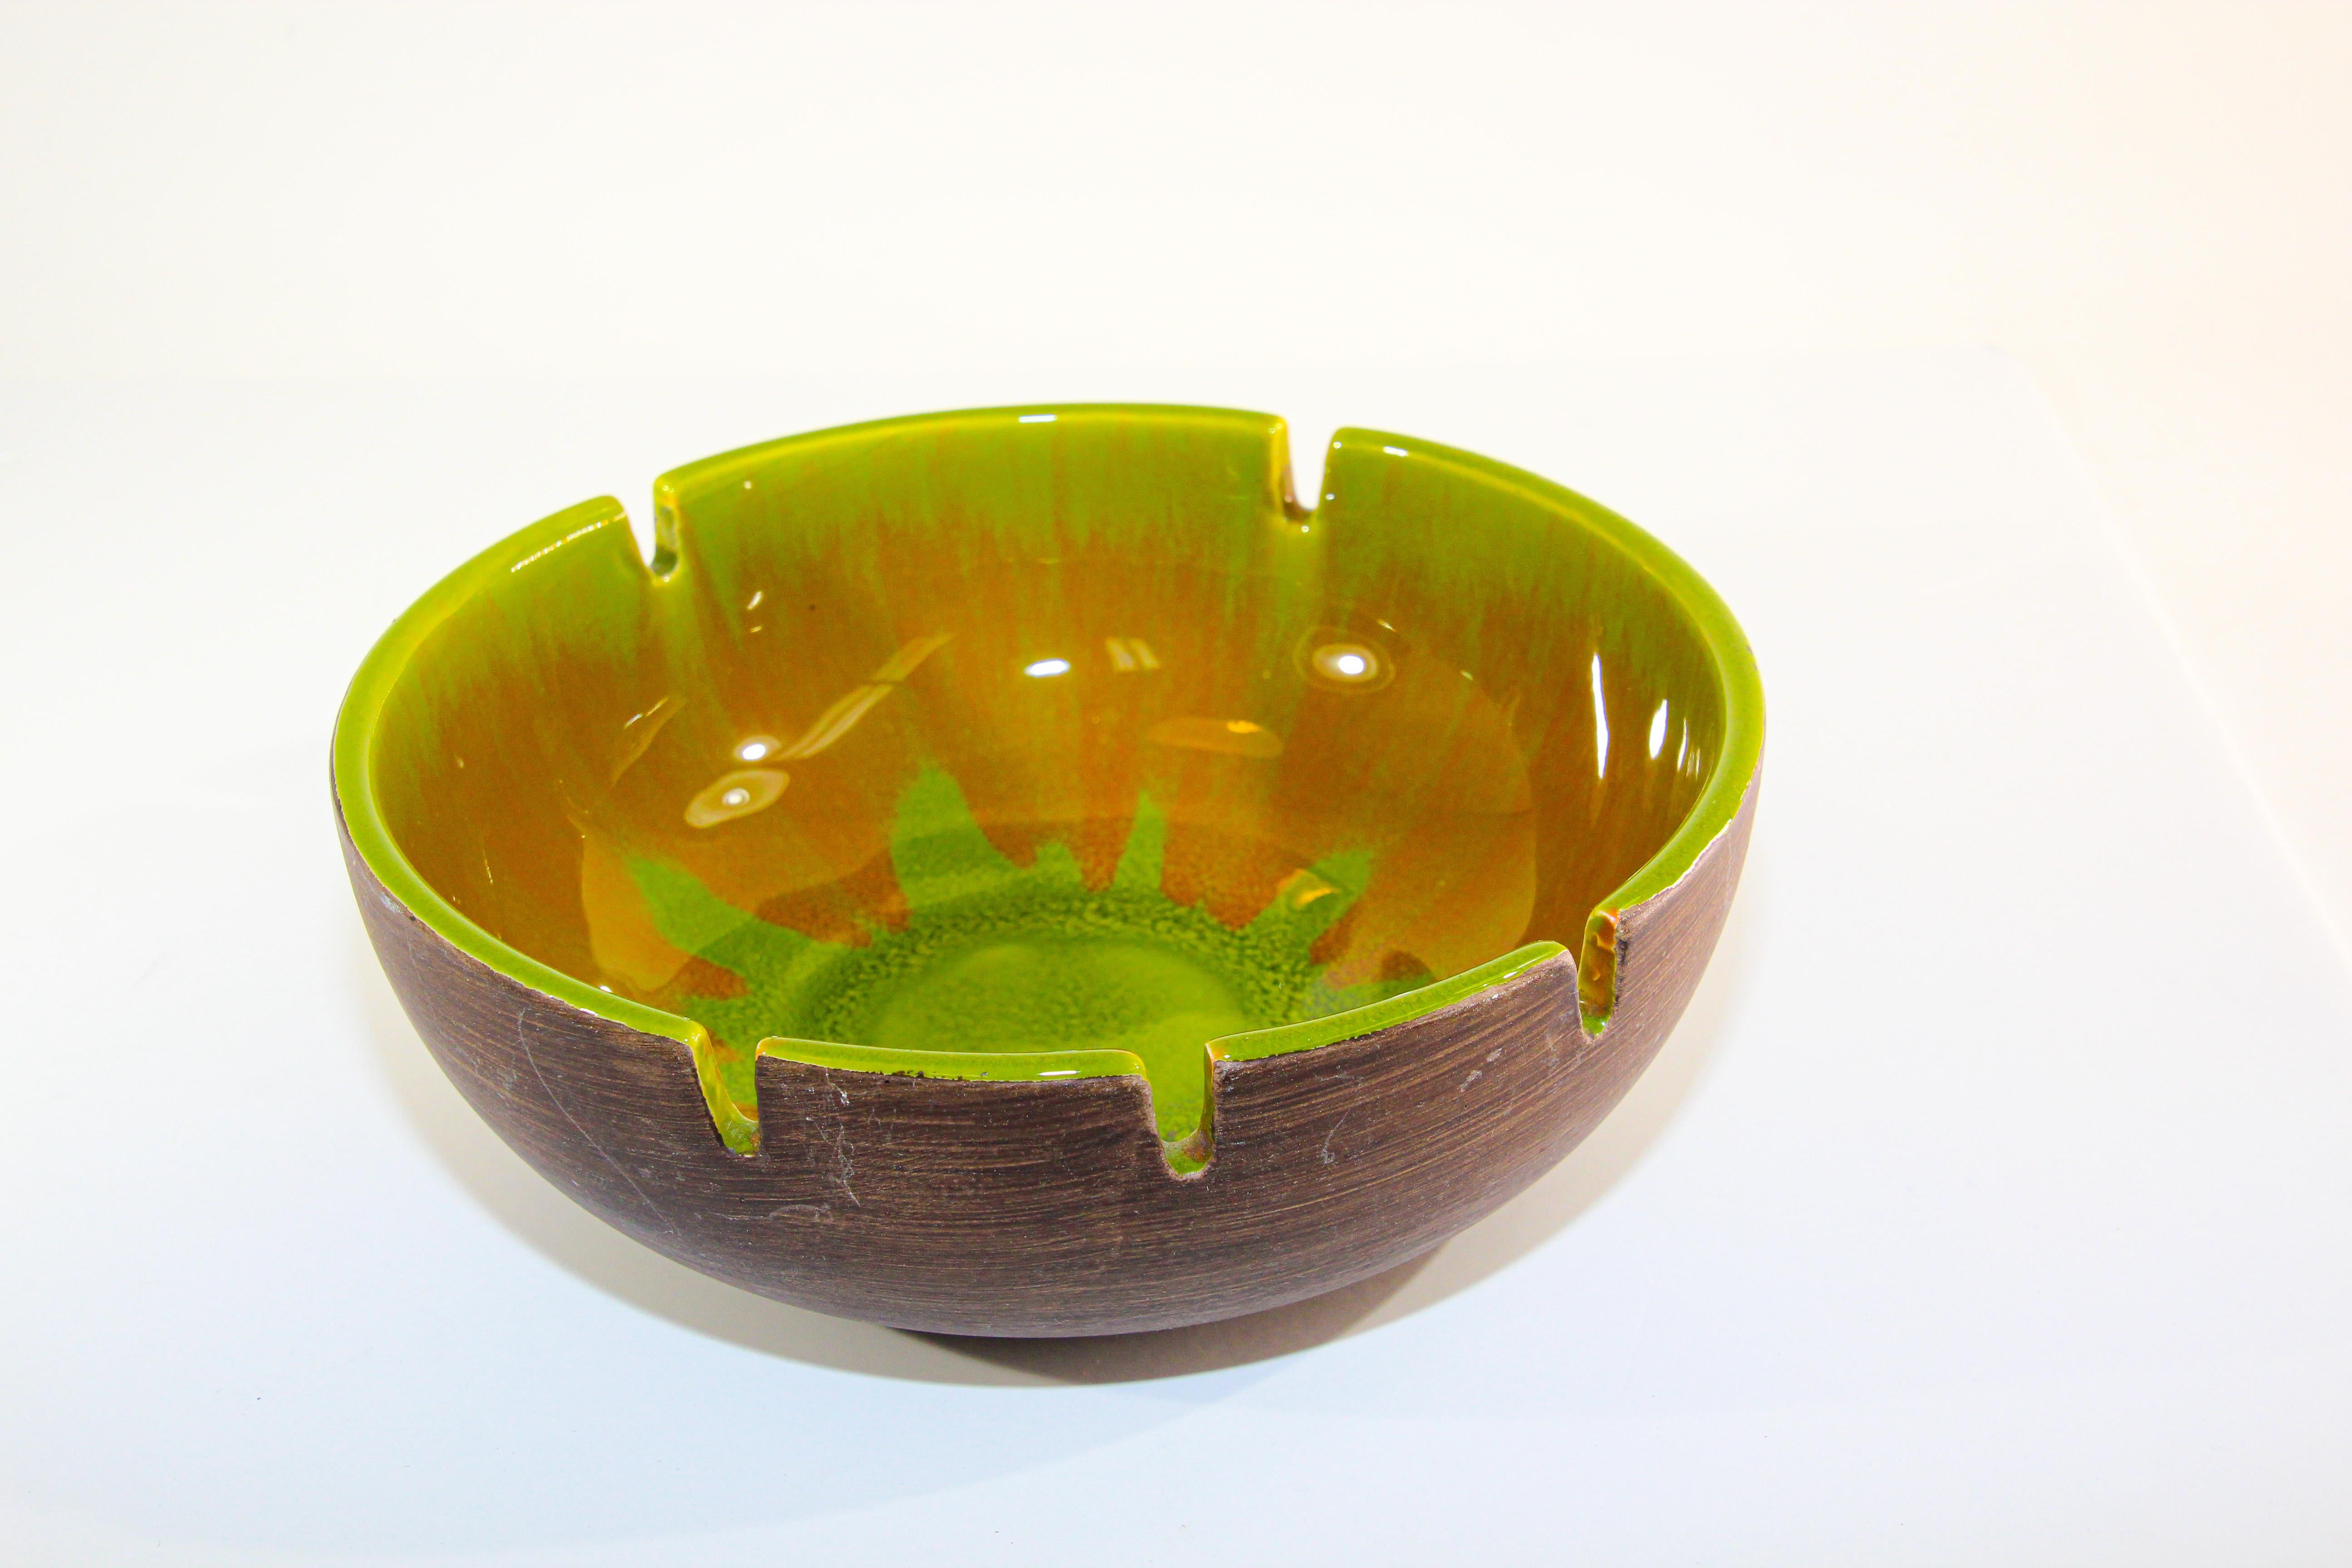 Gorgeous vintage ashtray with a glowing splash in yellow, green and brown colors.
Classic Mid-Century Modern round ashtray in yellow green and brown glazed ceramic, the outside is painted brown but not glazed.
The ceramic tray is in good